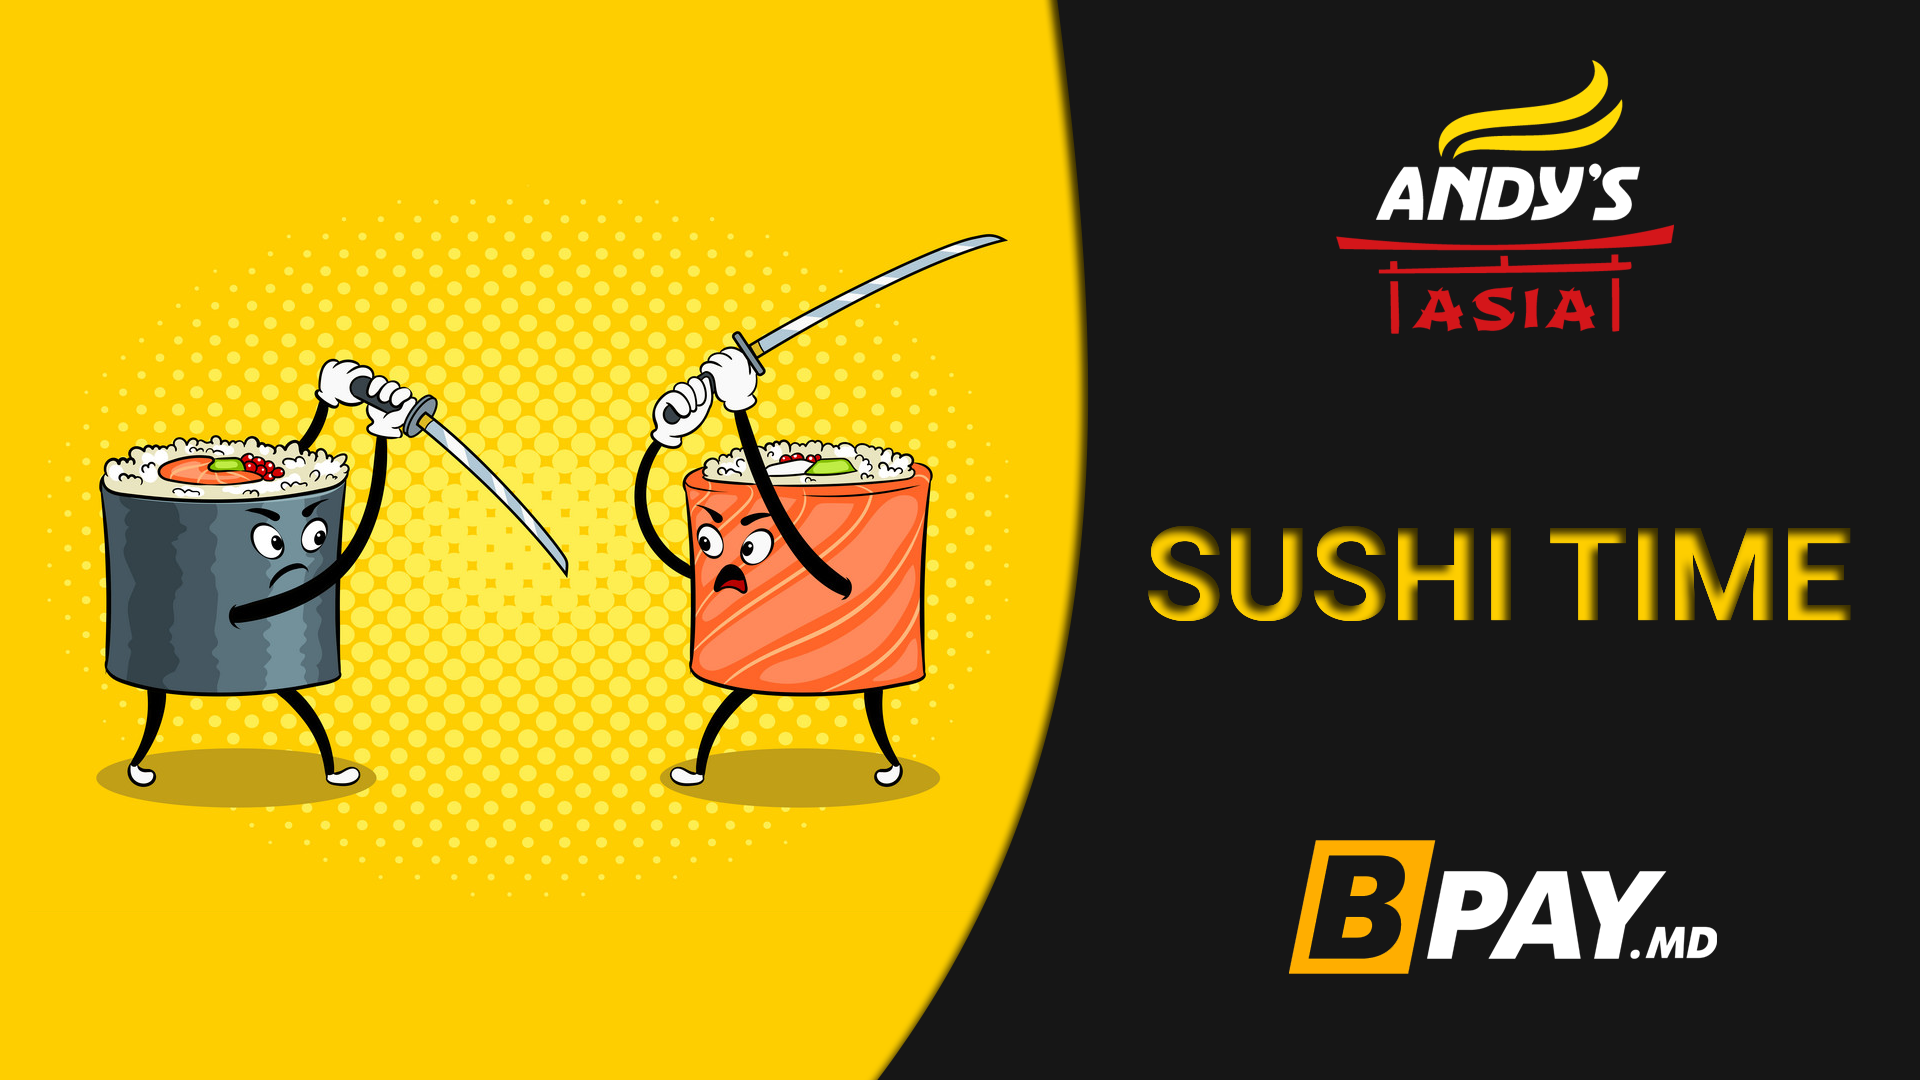 🍣 SUSHI TIME: Andy’s Asia и BPAY